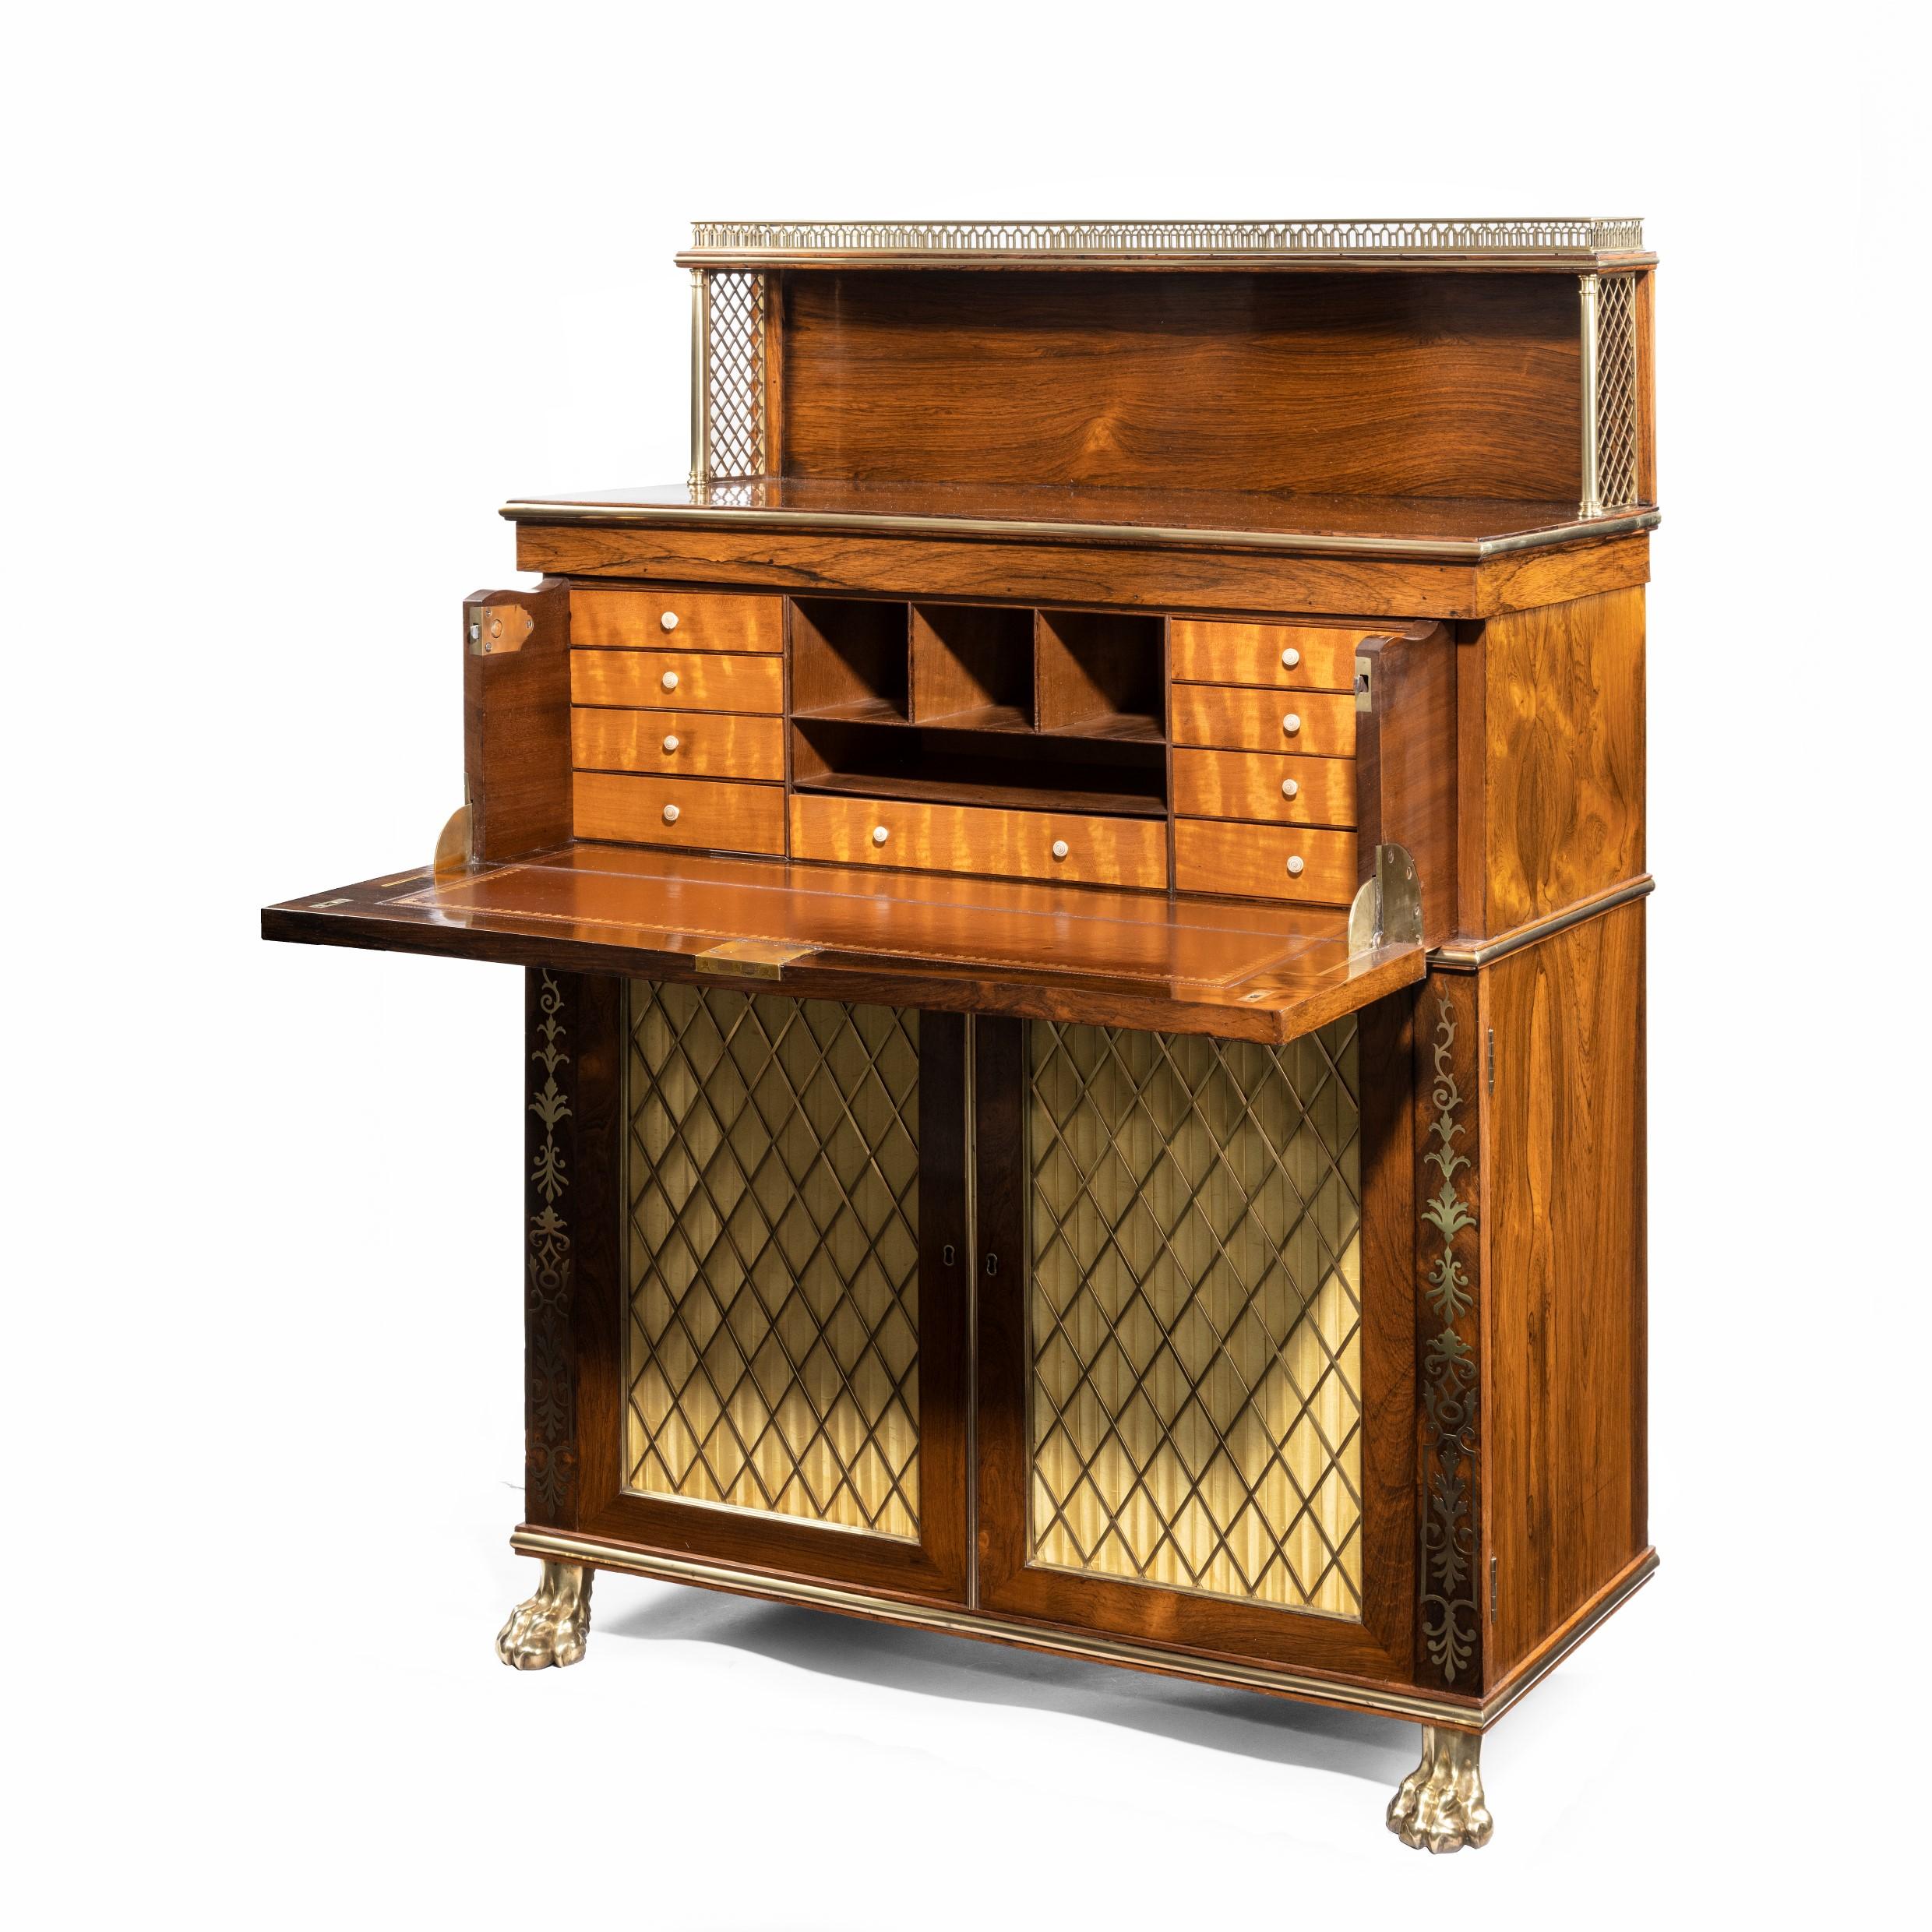 A Regency brass-inlaid rosewood secretaire cabinet, the rectangular top with a pierced galleried shelf with trellis work on the sides, above a secretaire drawer, banded with brass palm leaves on an ebony ground, enclosing nine satinwood shelves